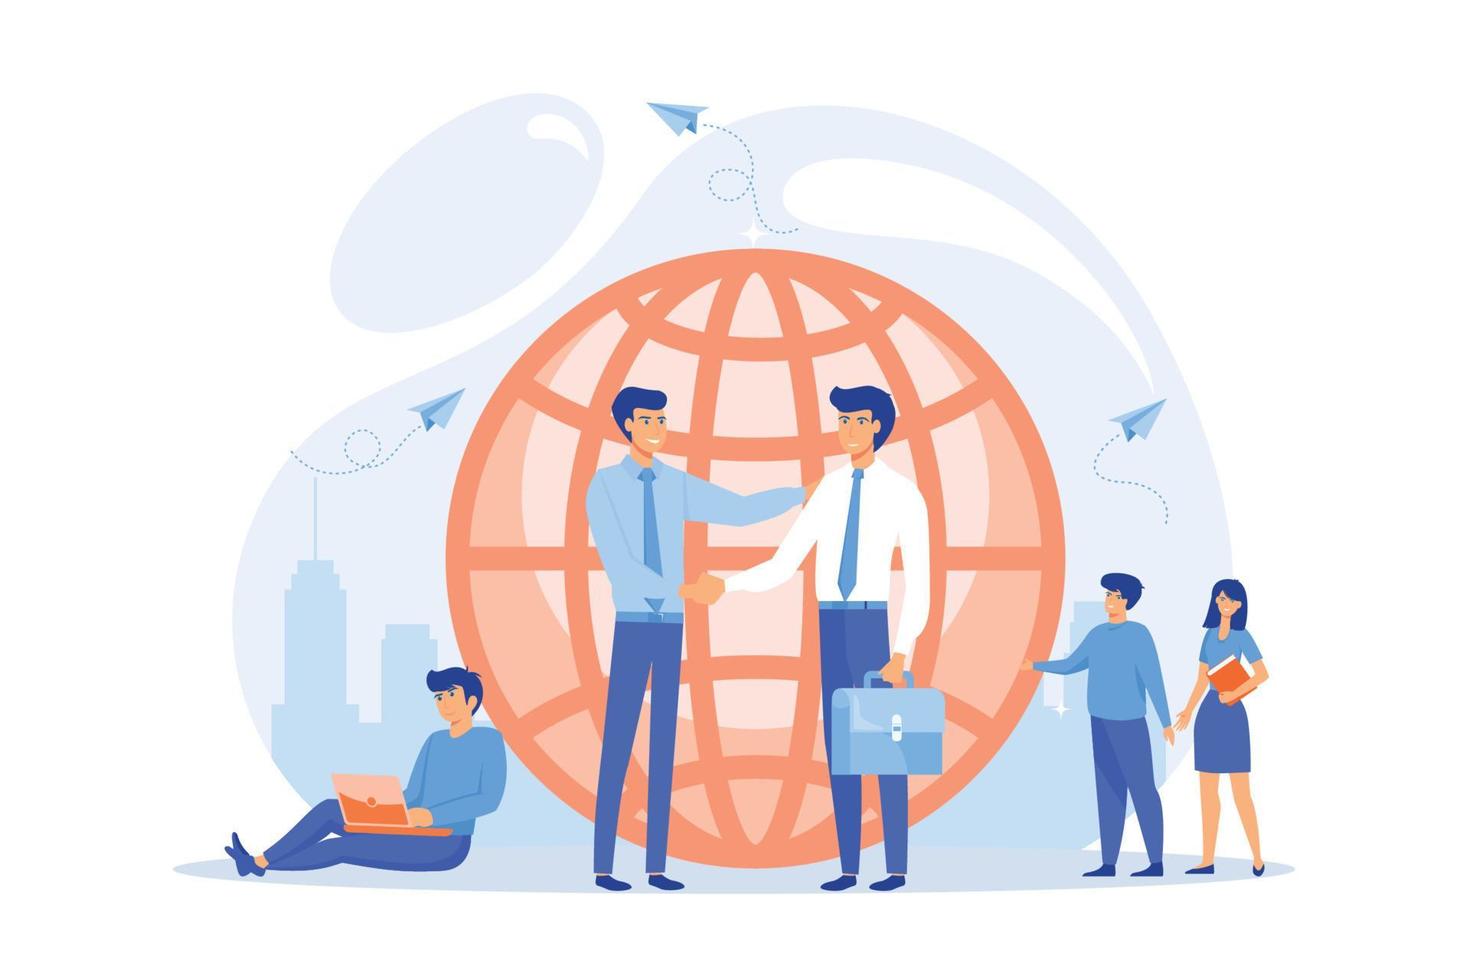 Human resources agency for migrants. Help hub. Expat work, effective migrant workers, expatriate programme, outside country employment concept, flat vector modern illustration